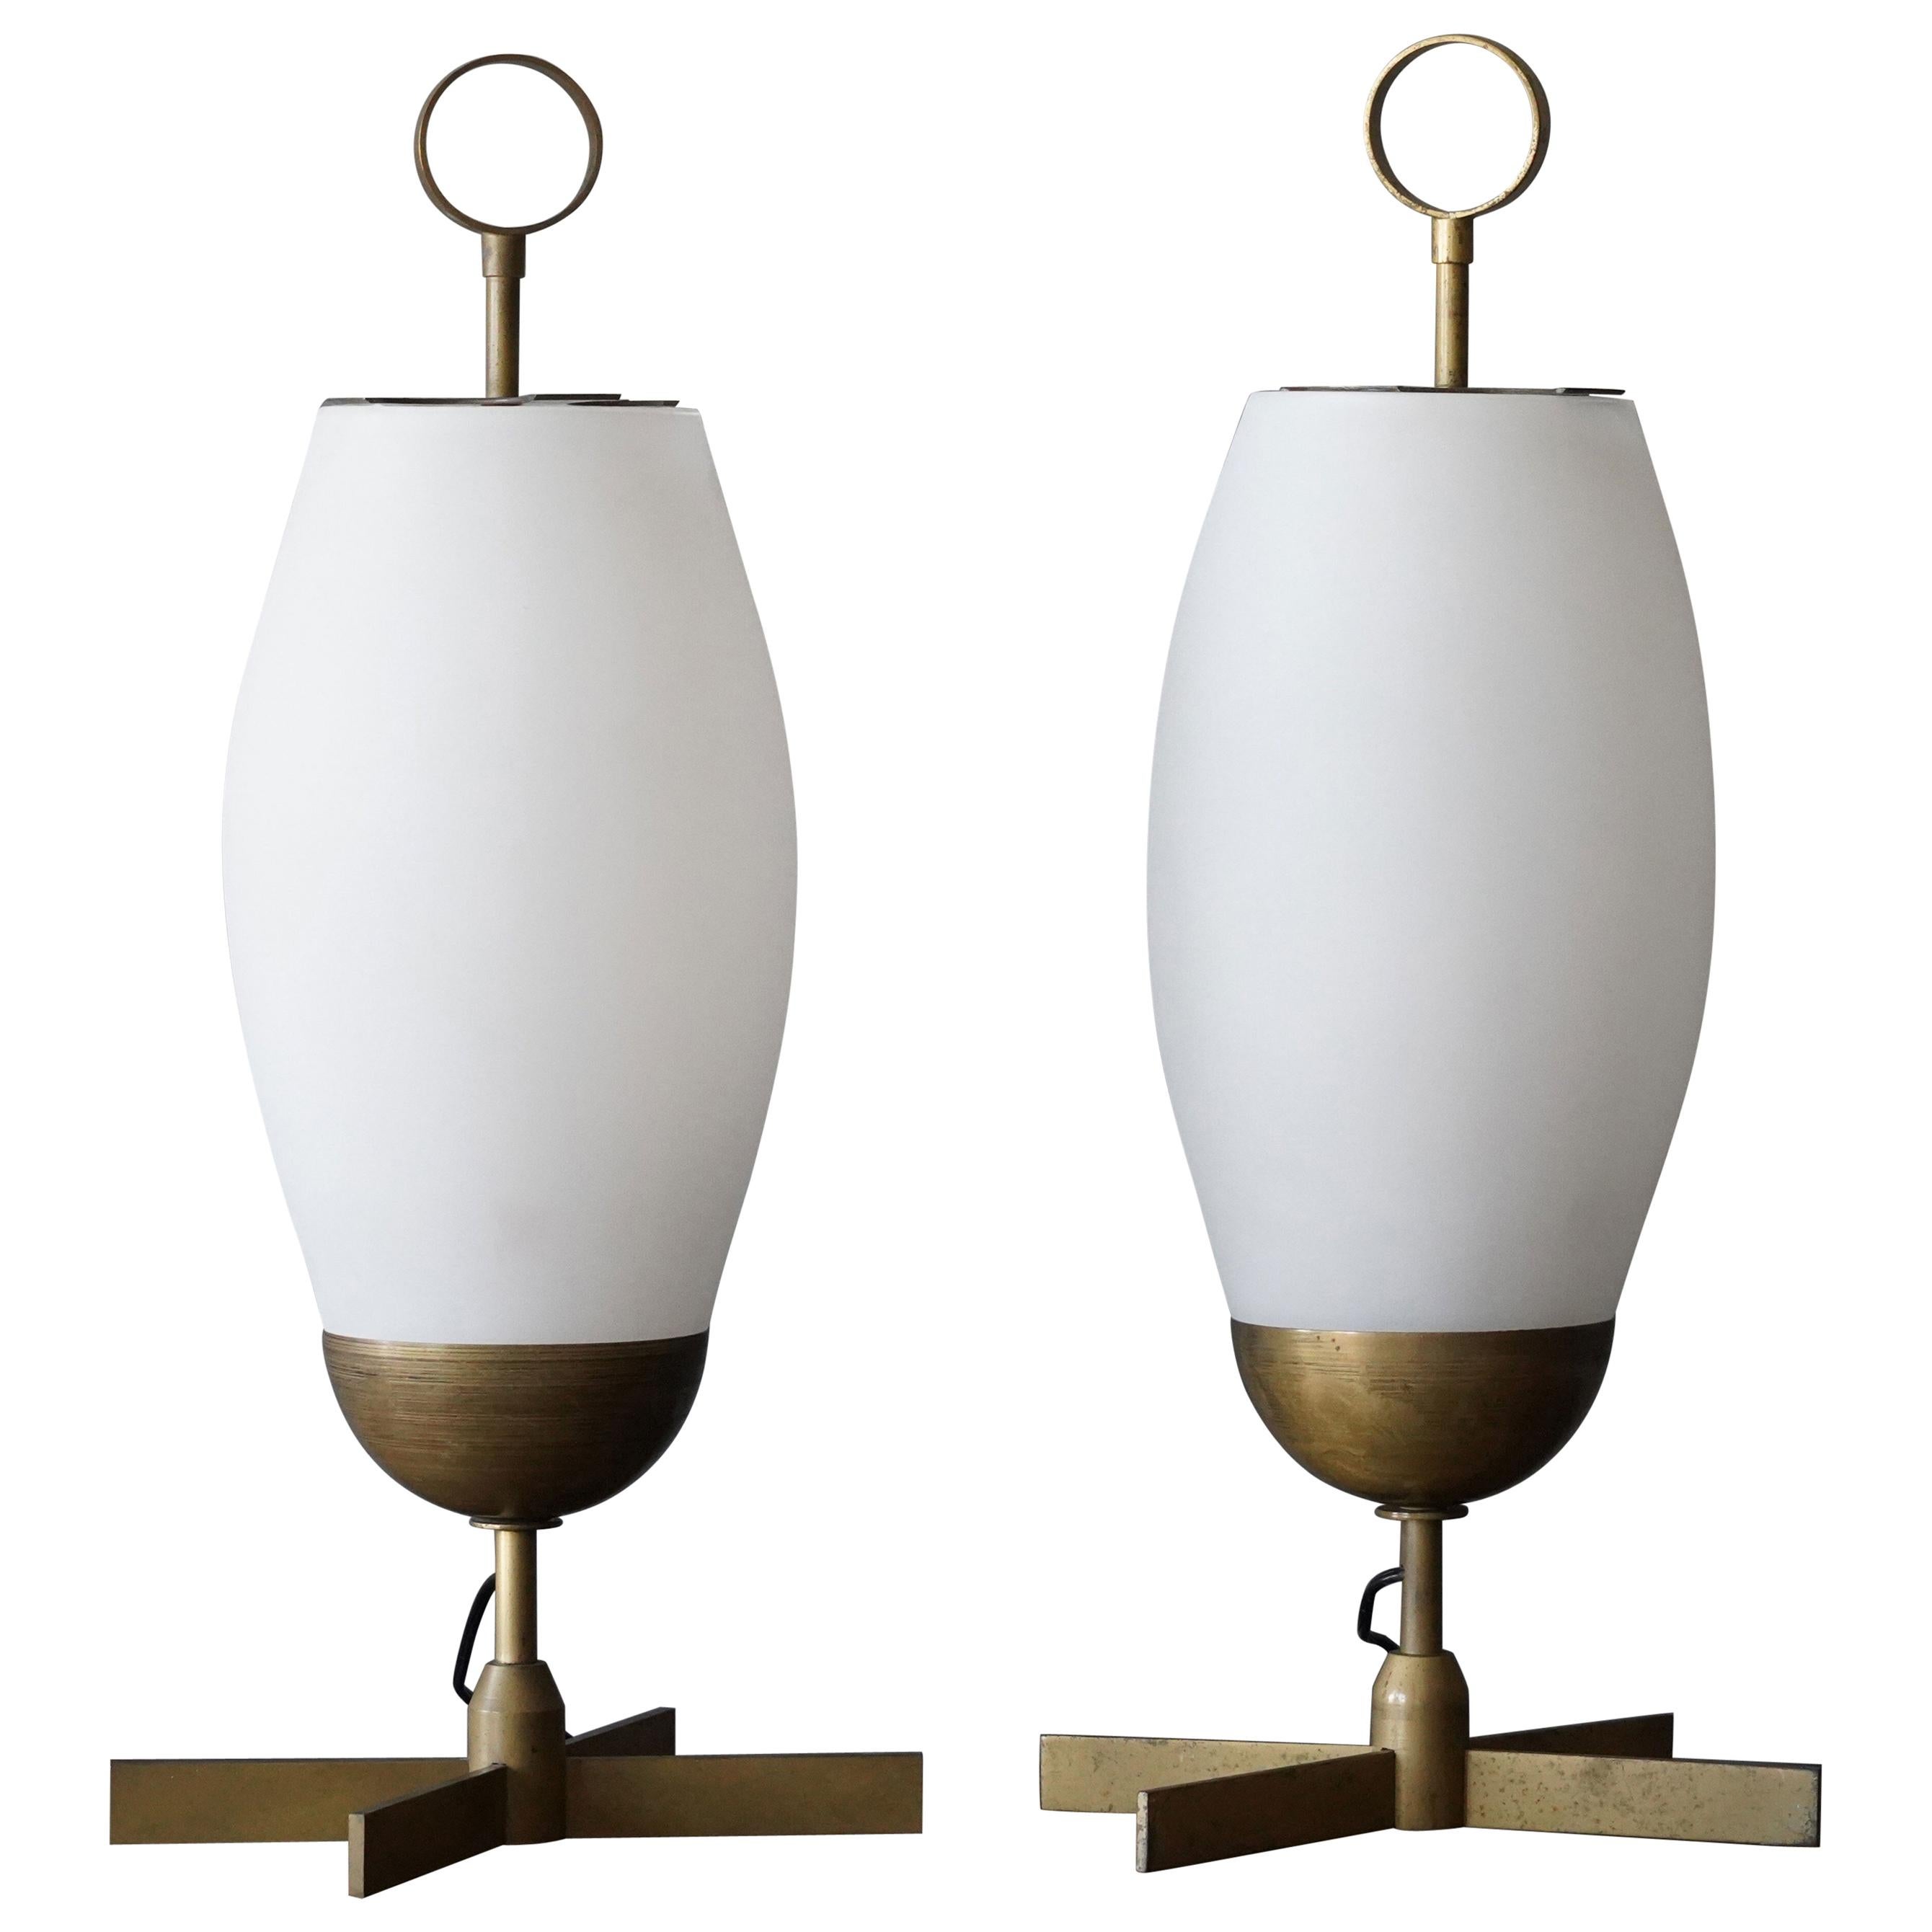 Italian Designer, Sizable Table Lamps, Brass, Fogged Glass, Italy, 1950s